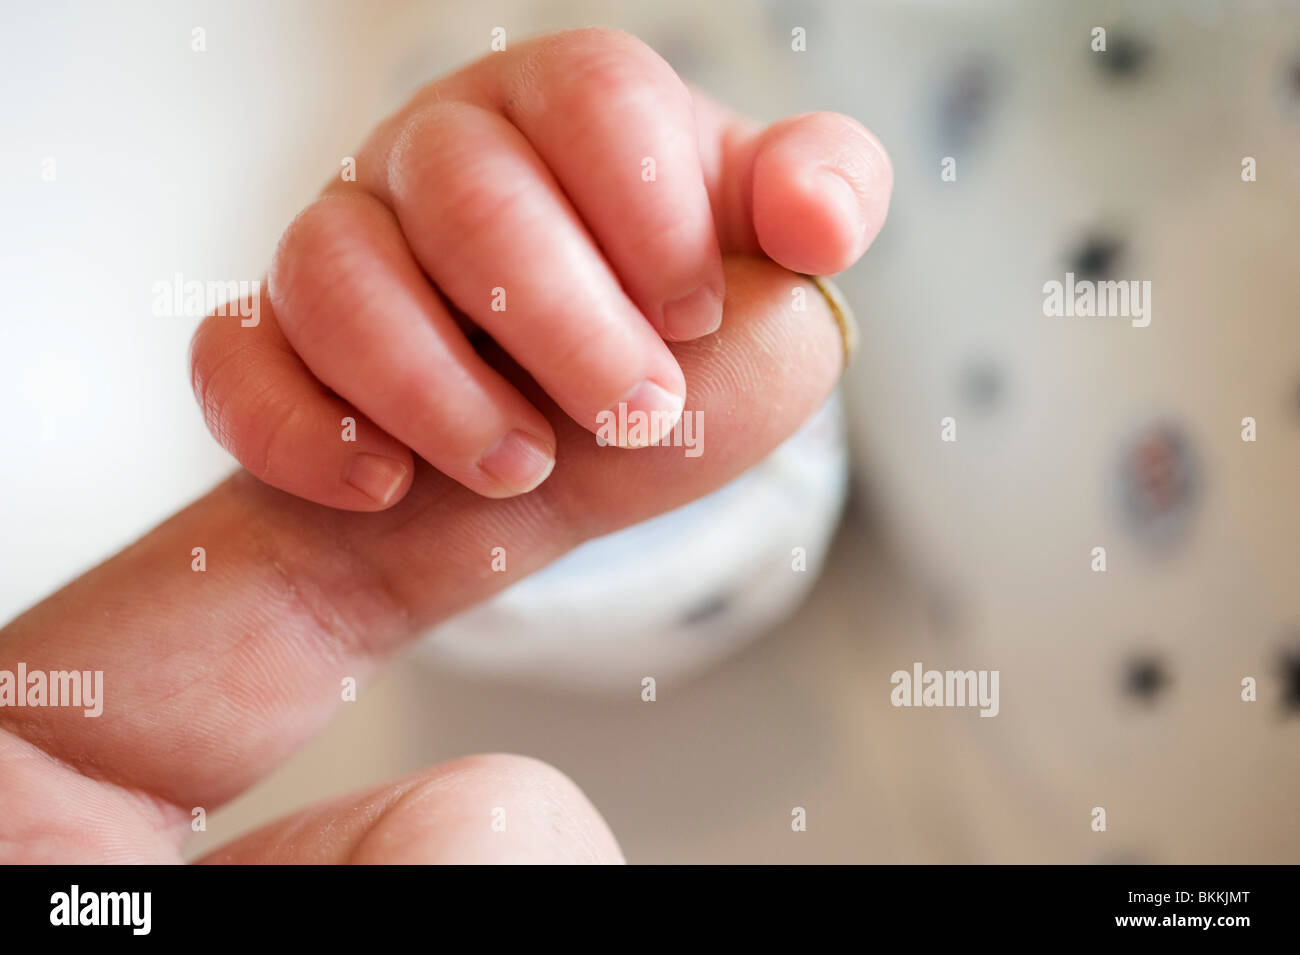 baby's hand gripping dads finger Stock Photo